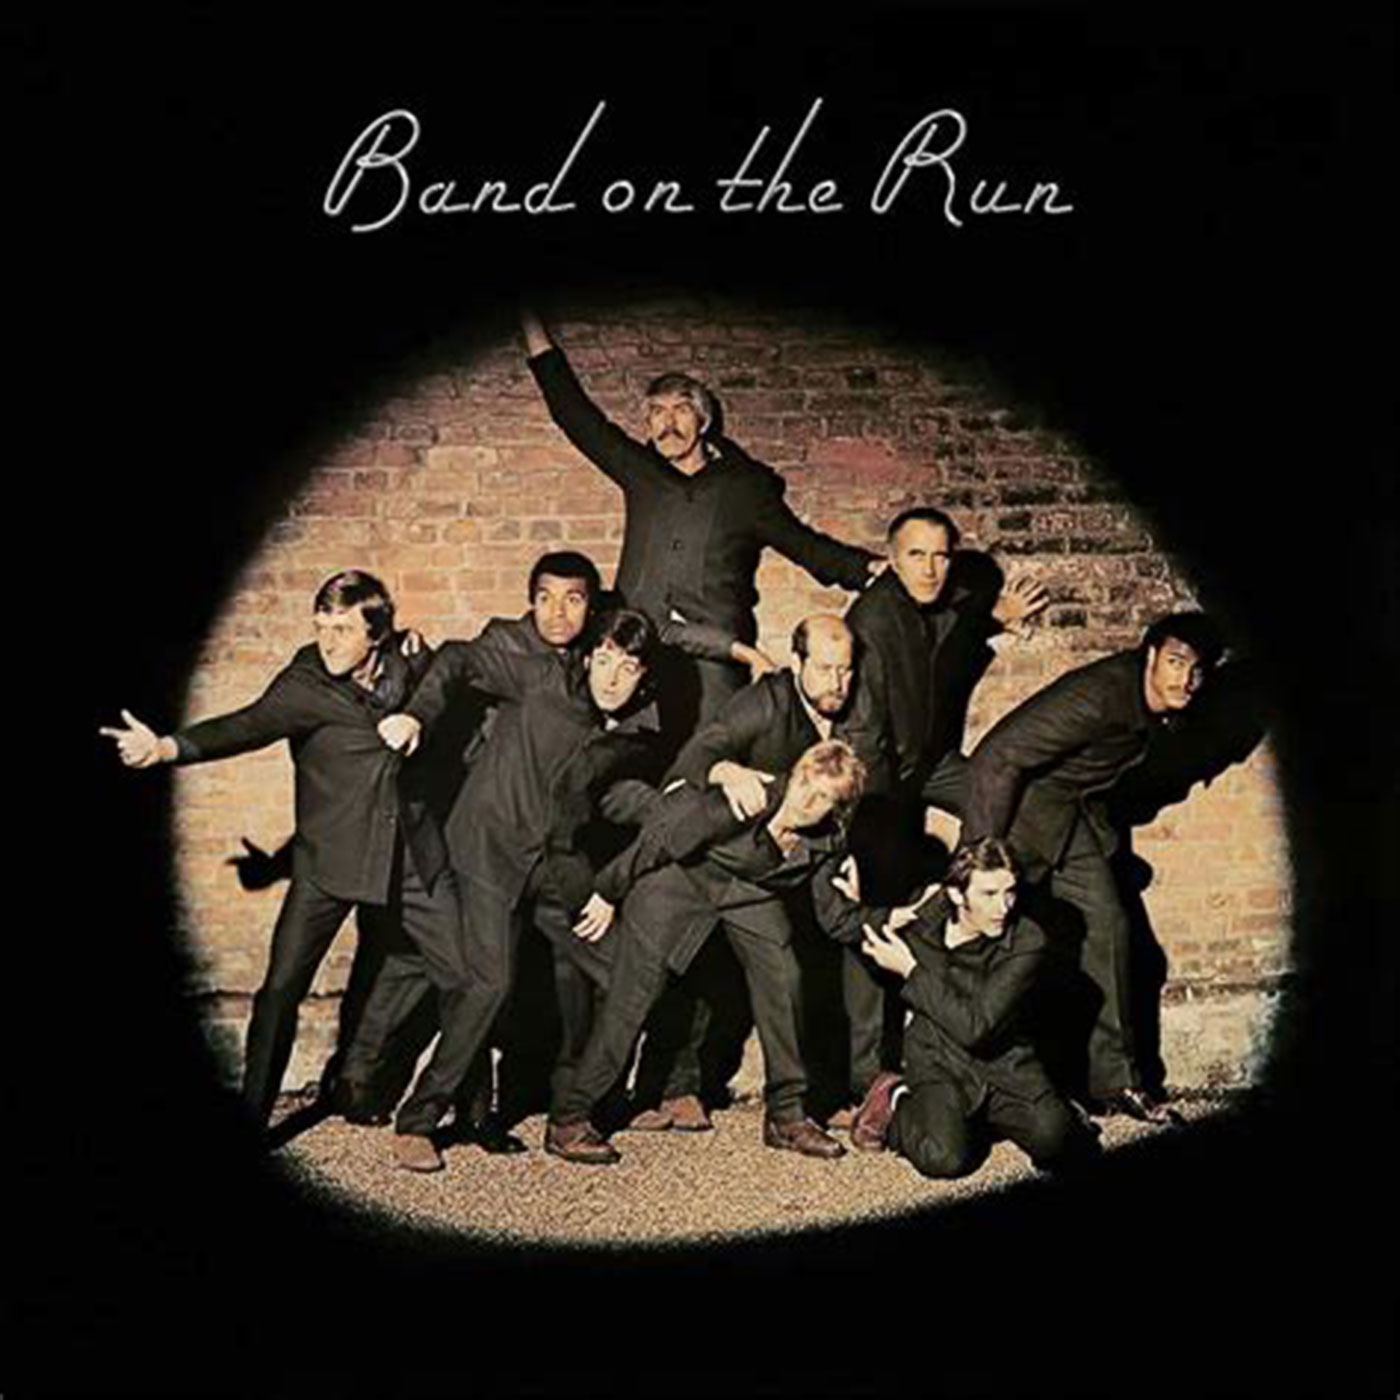 295 Paul McCartney and Wings – Band on the Run